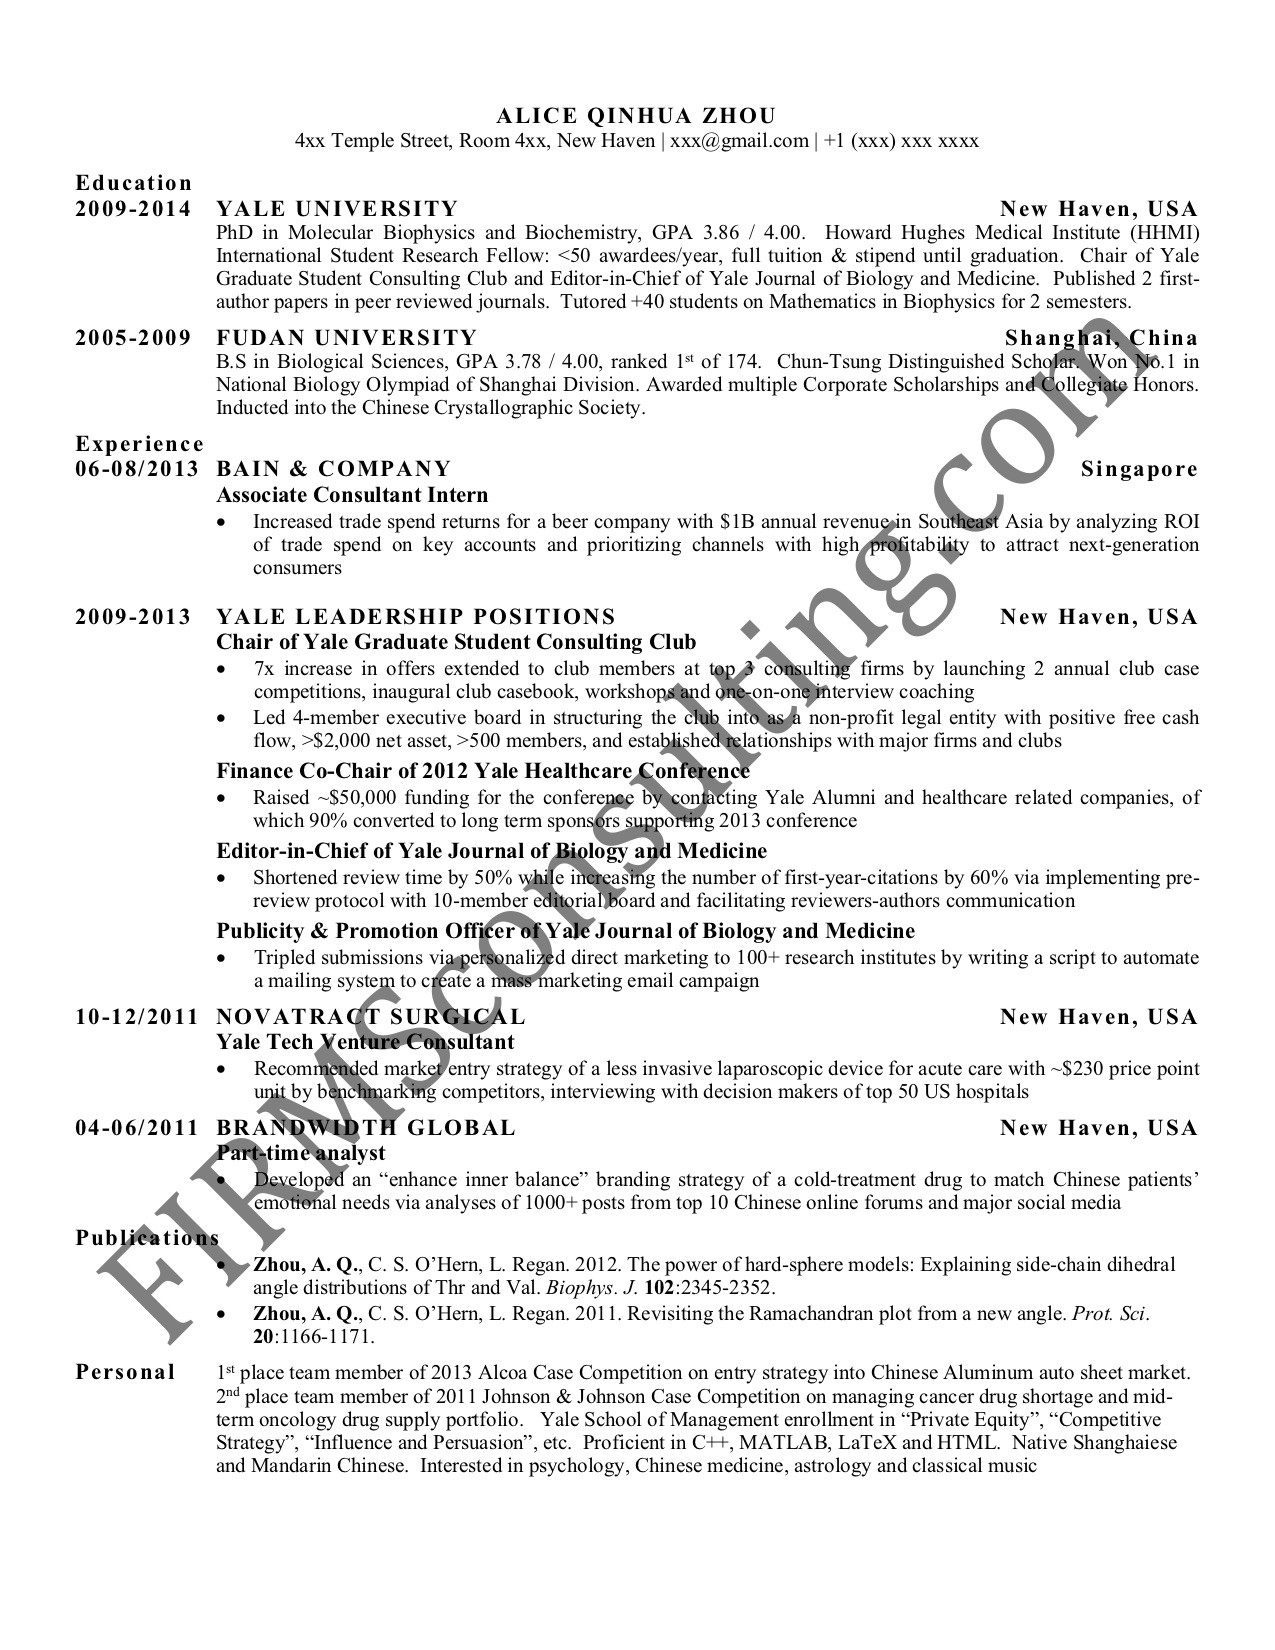 Resume Samples that Got Interview Invite From Mkinsey Consulting Resume – Firmsconsulting Strategy Skills & Case …